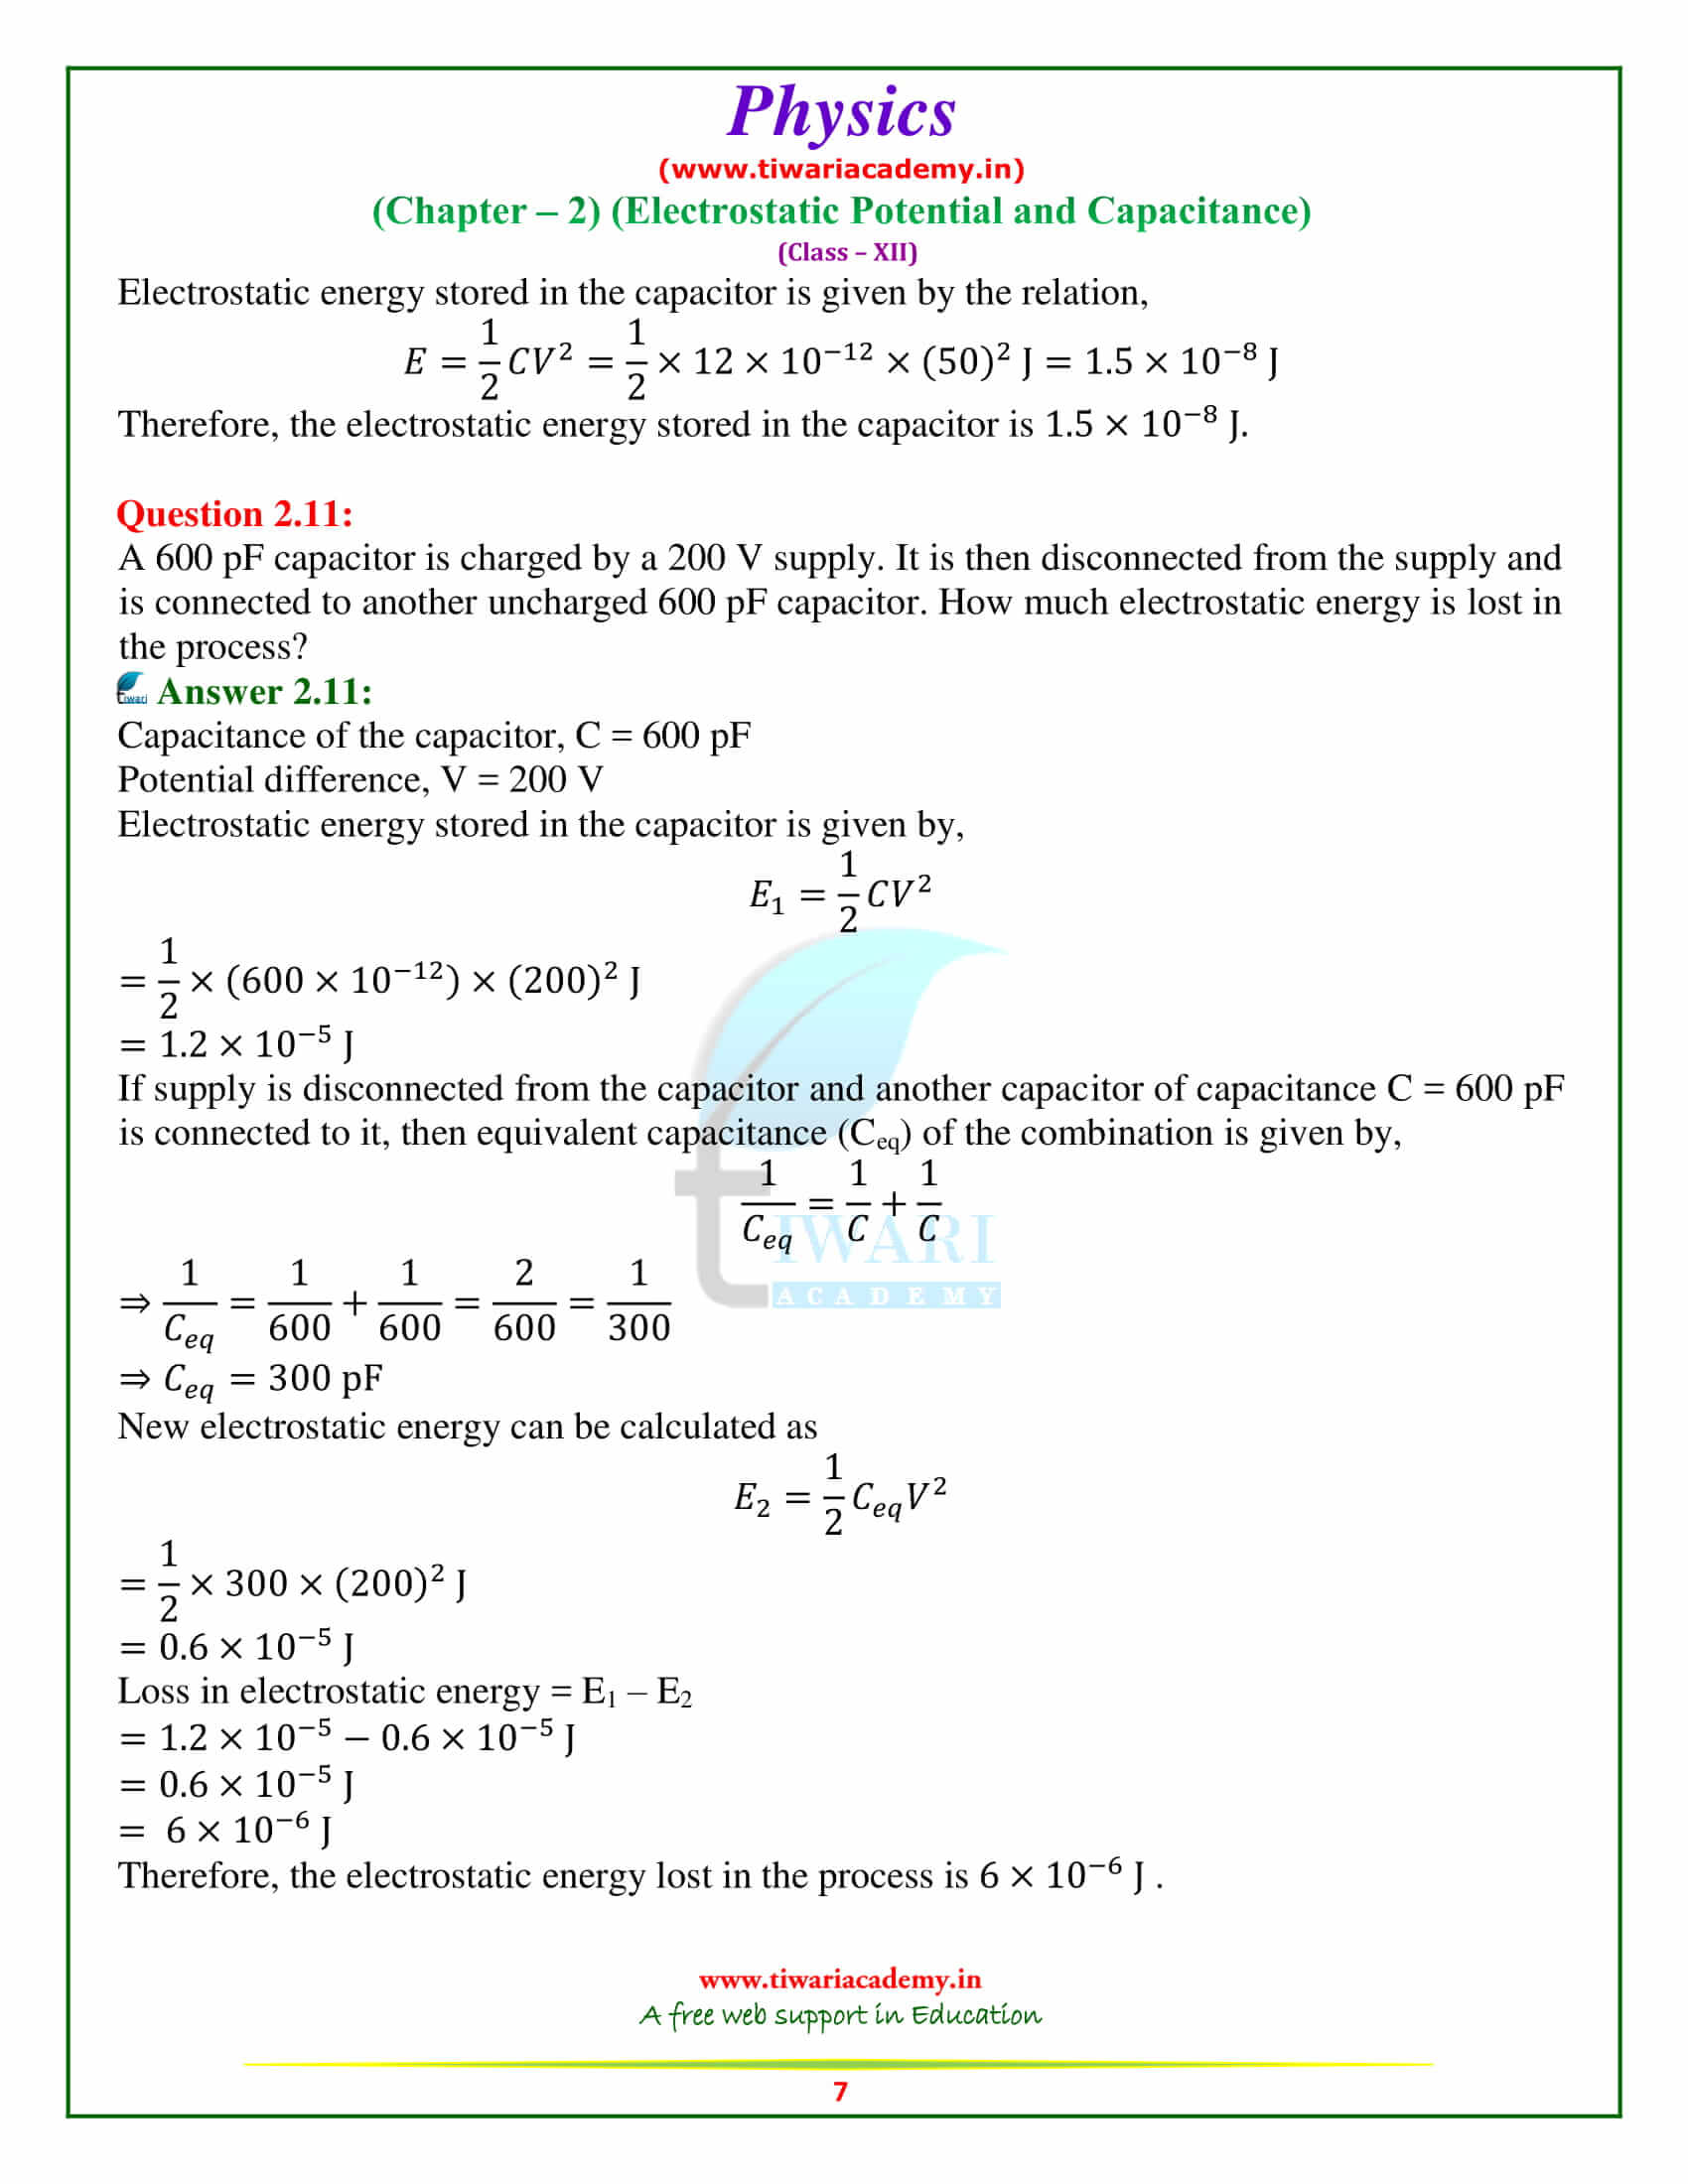 NCERT Solutions for Class 12 Physics Chapter 2 all in updated form